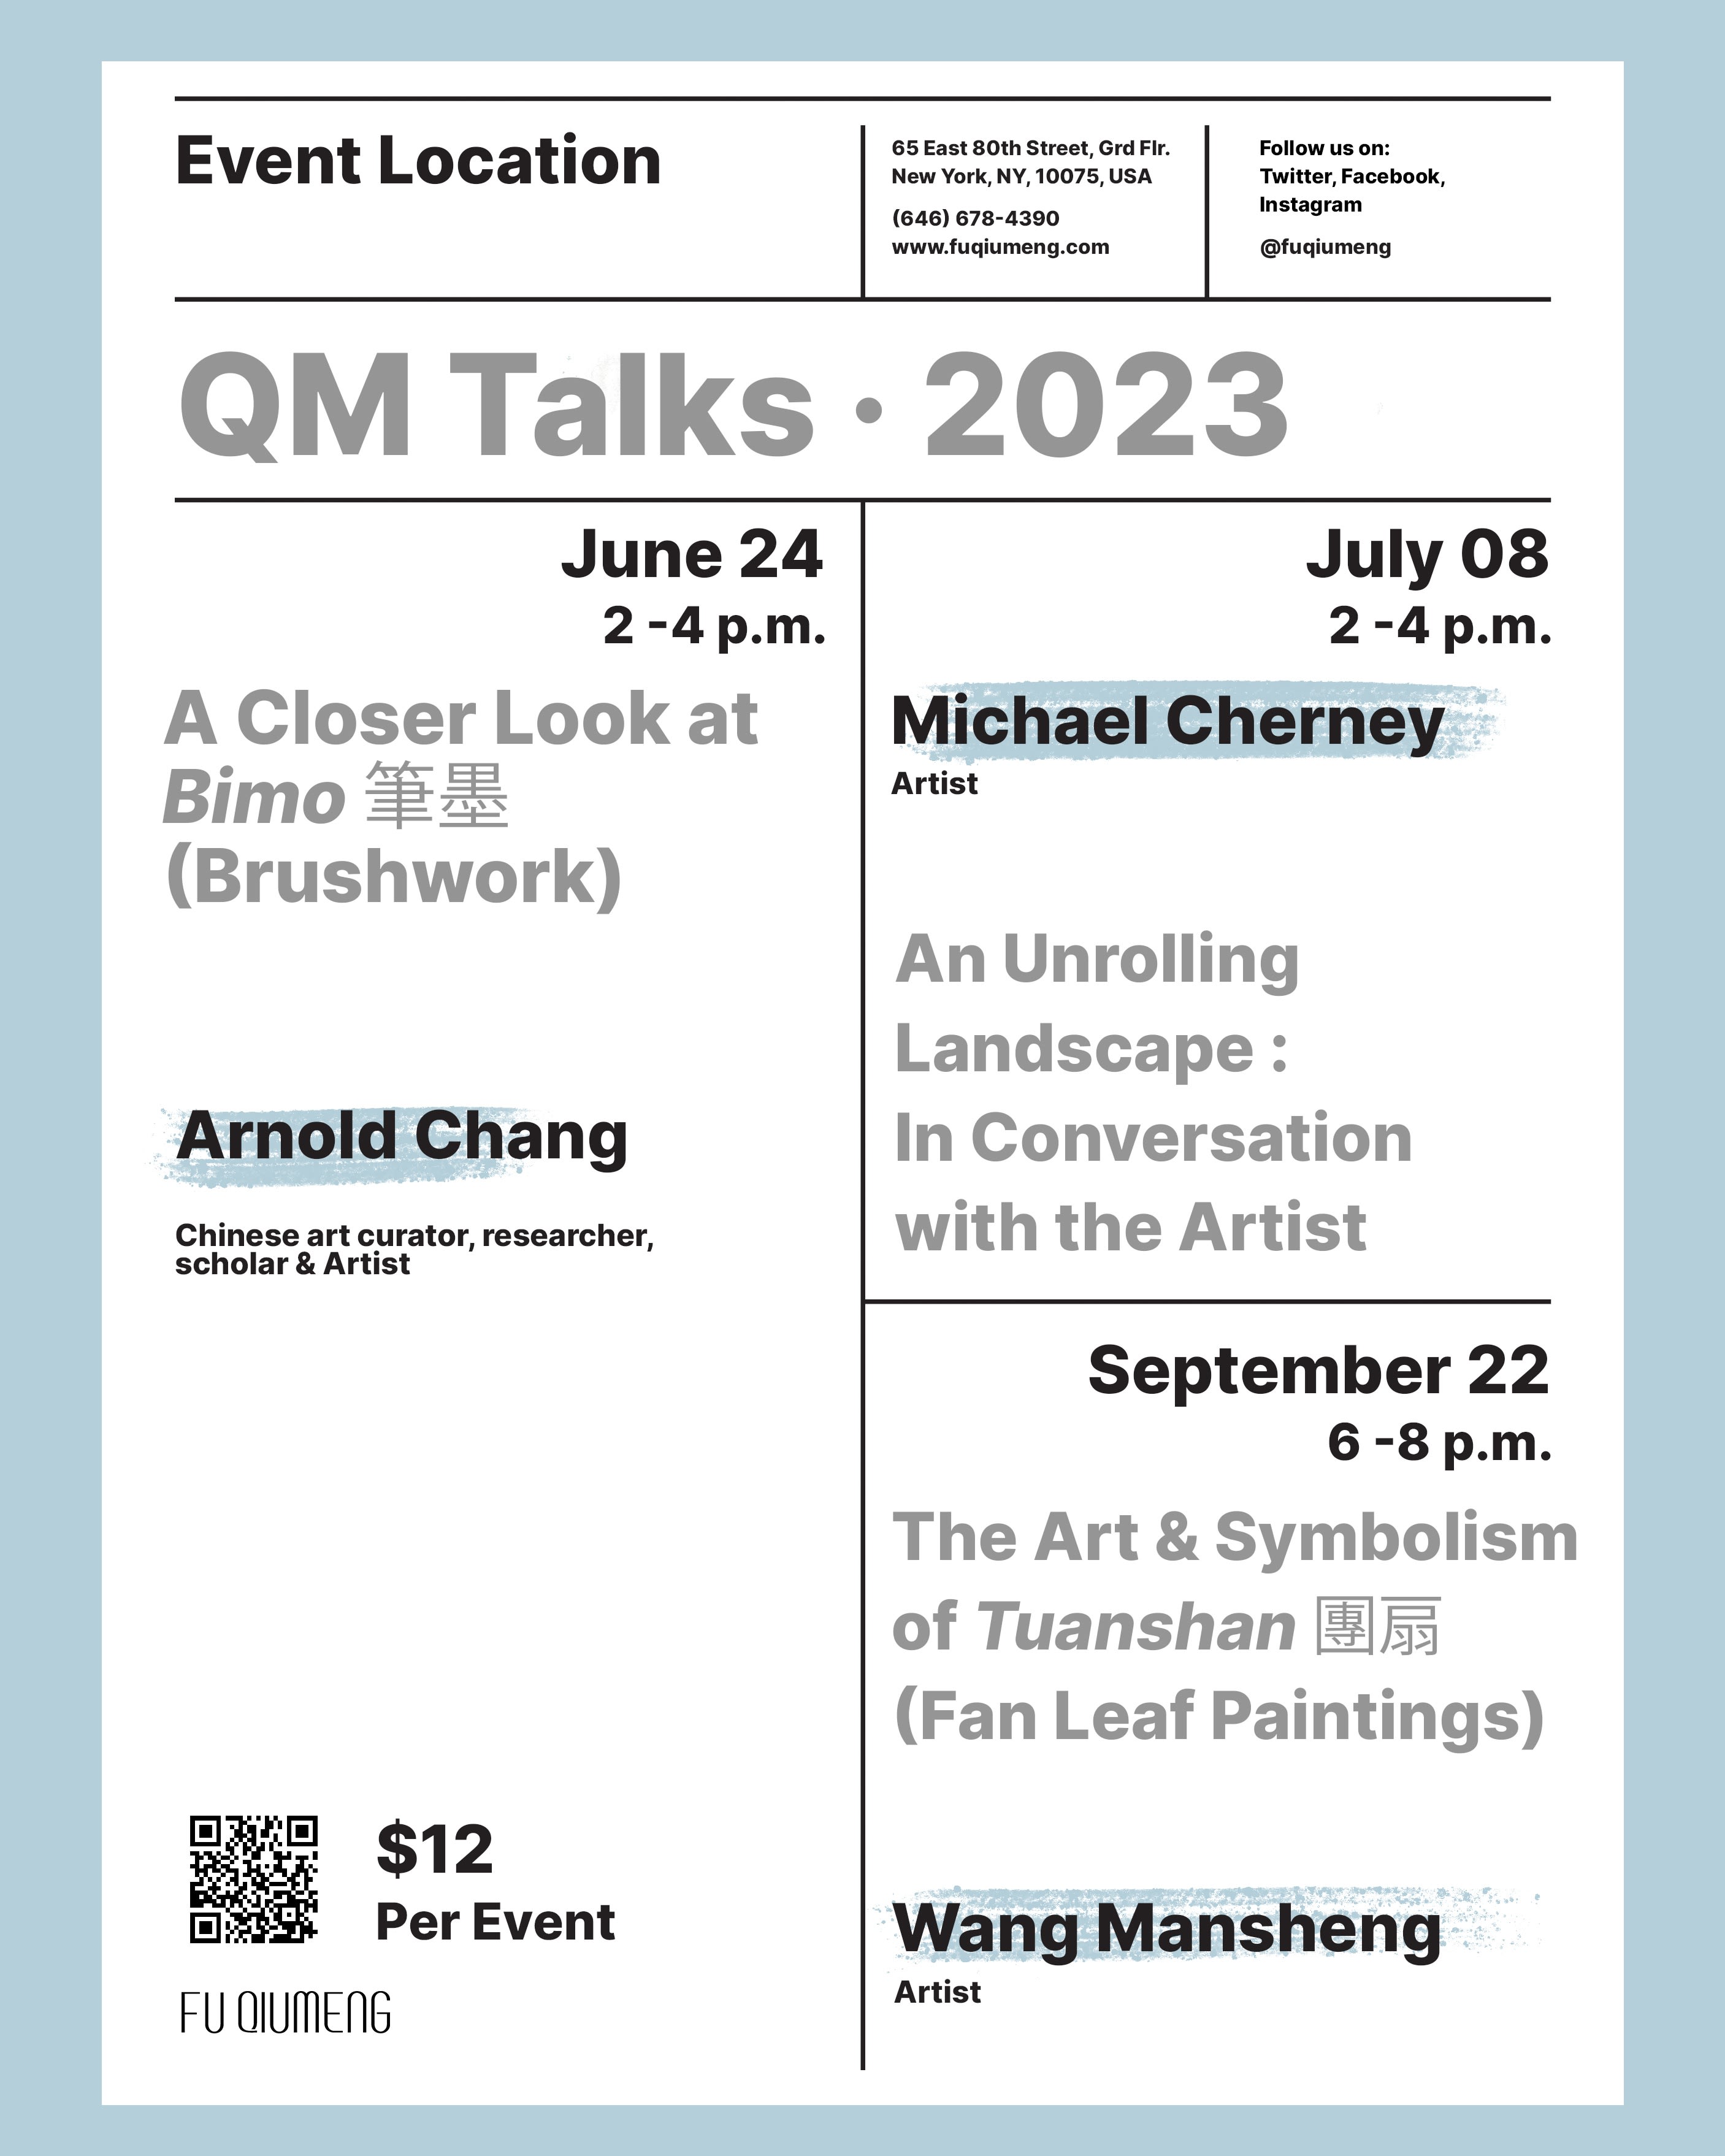 QM talks 2023 poster shows time and location